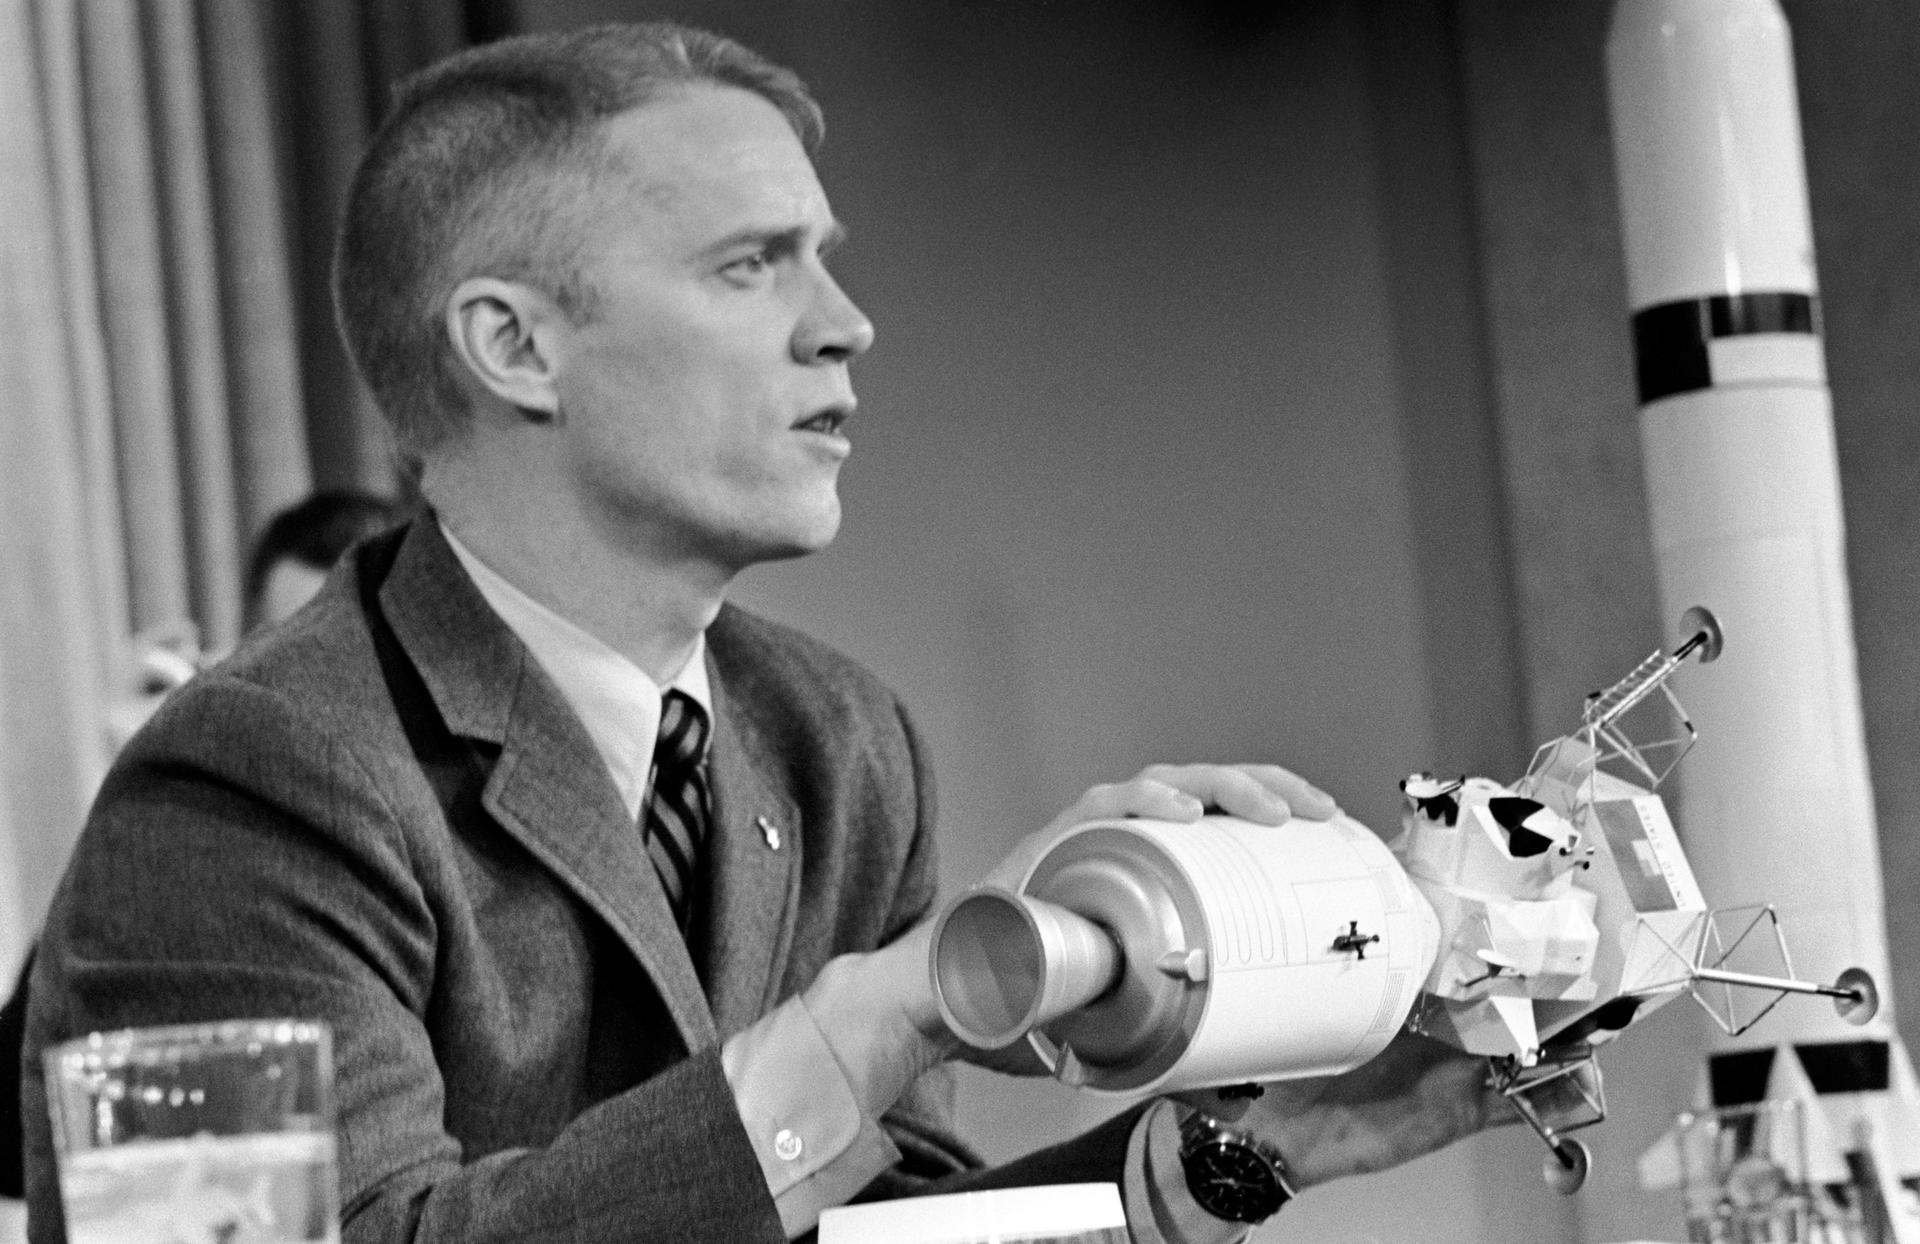 Astronaut Rusty Schweickart talks at a press conference in January 1969